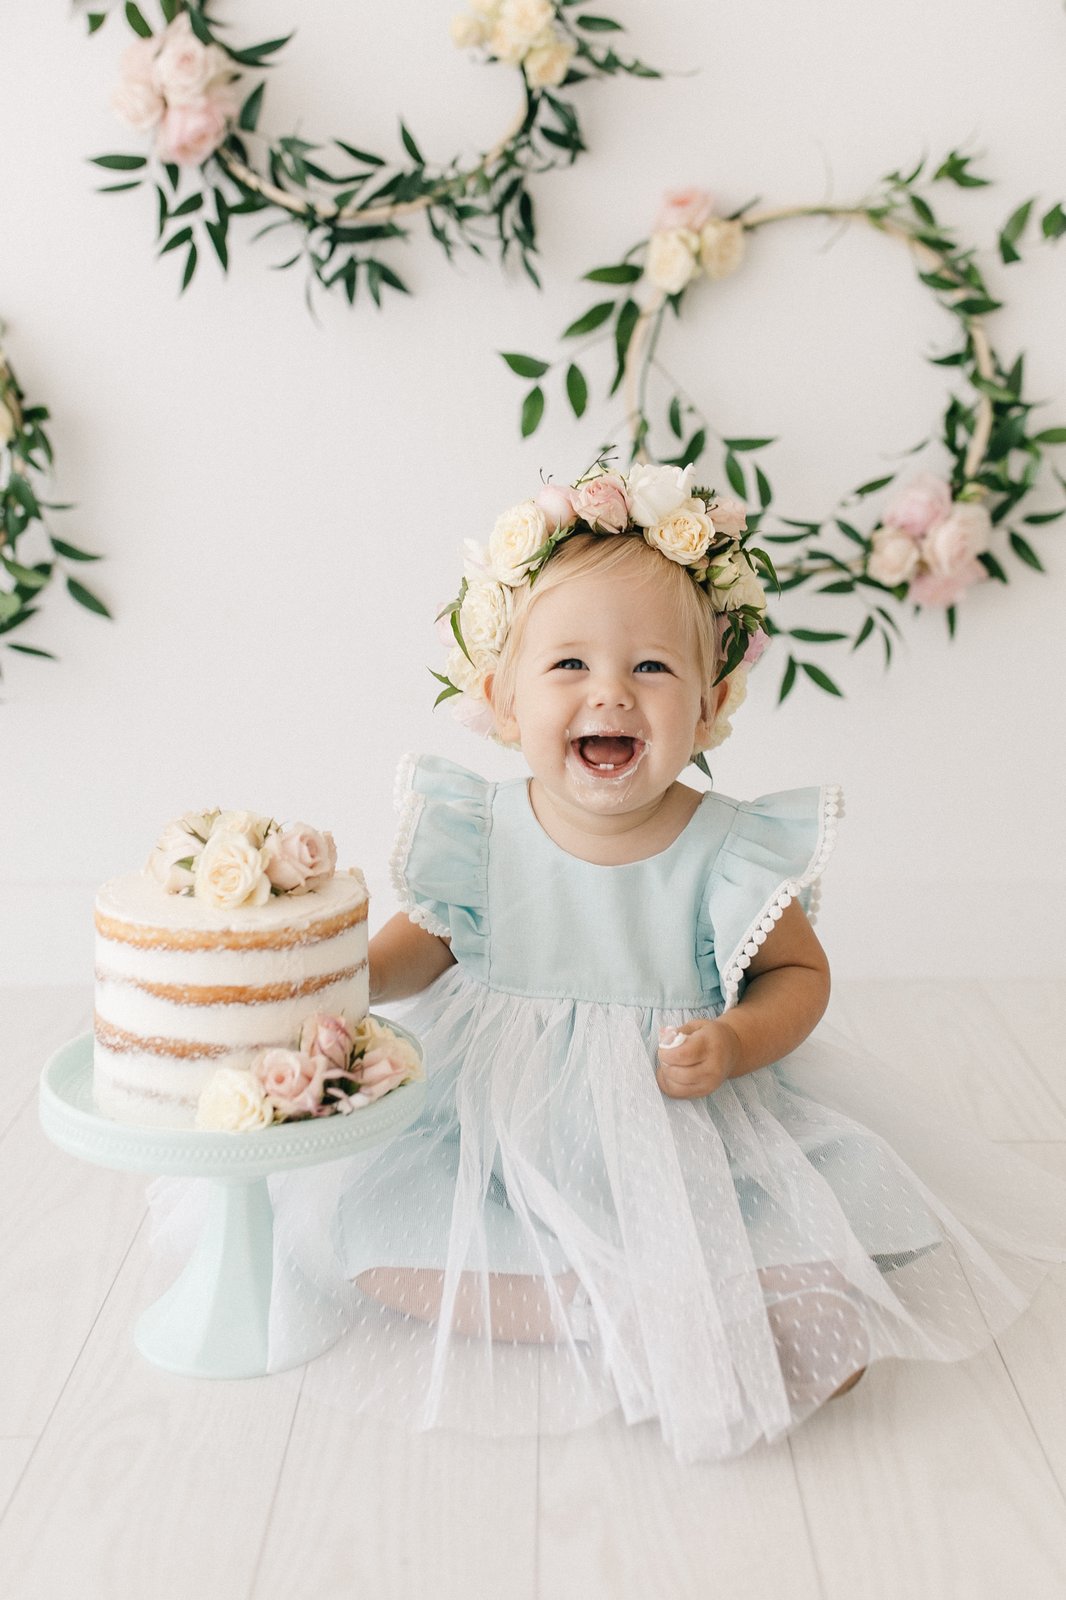 baby occasion dress